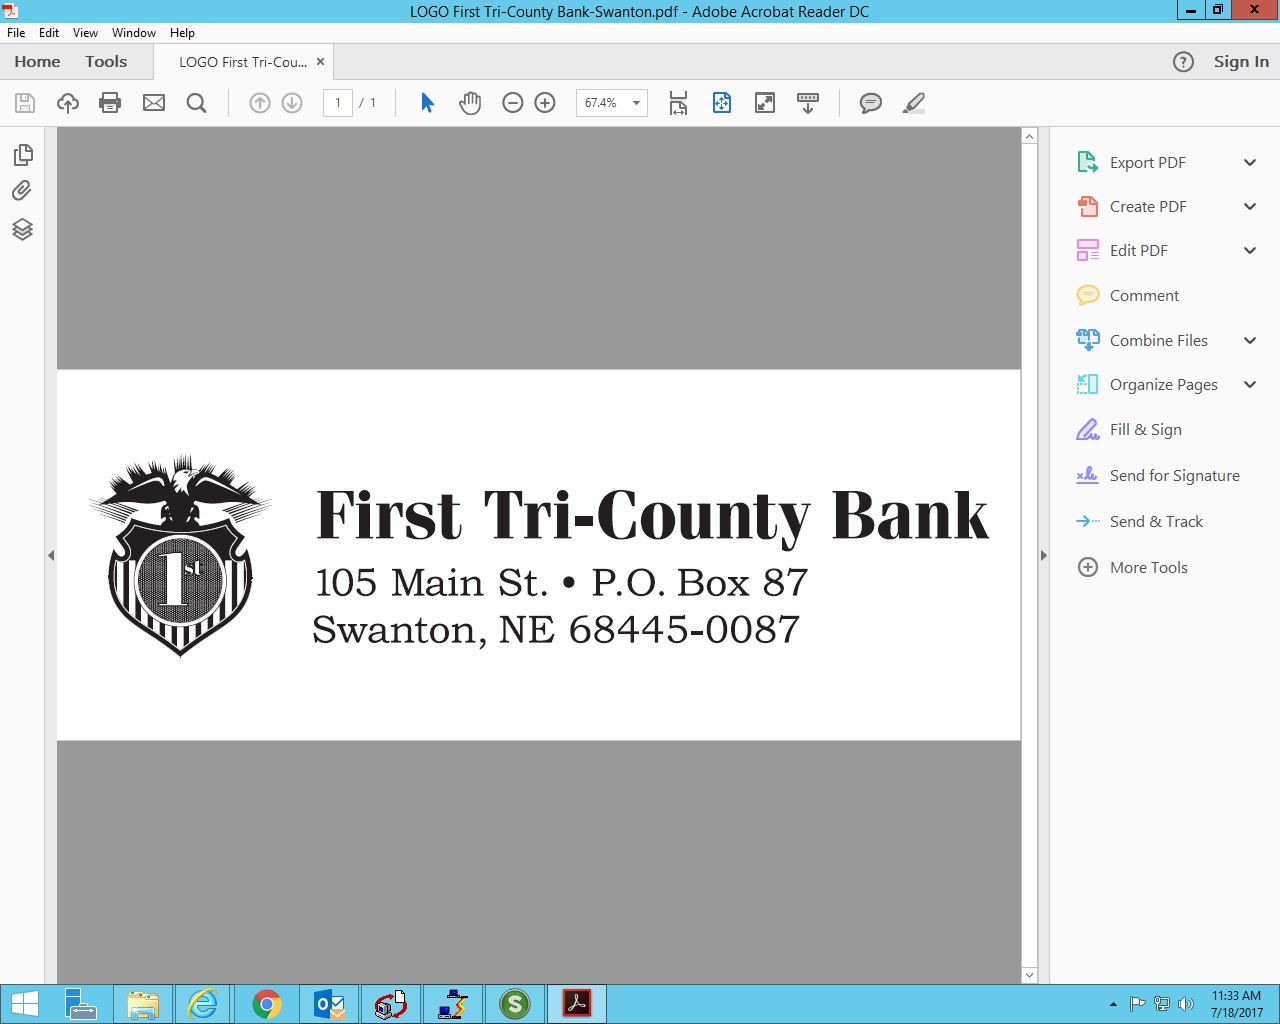 First Tri-County Bank